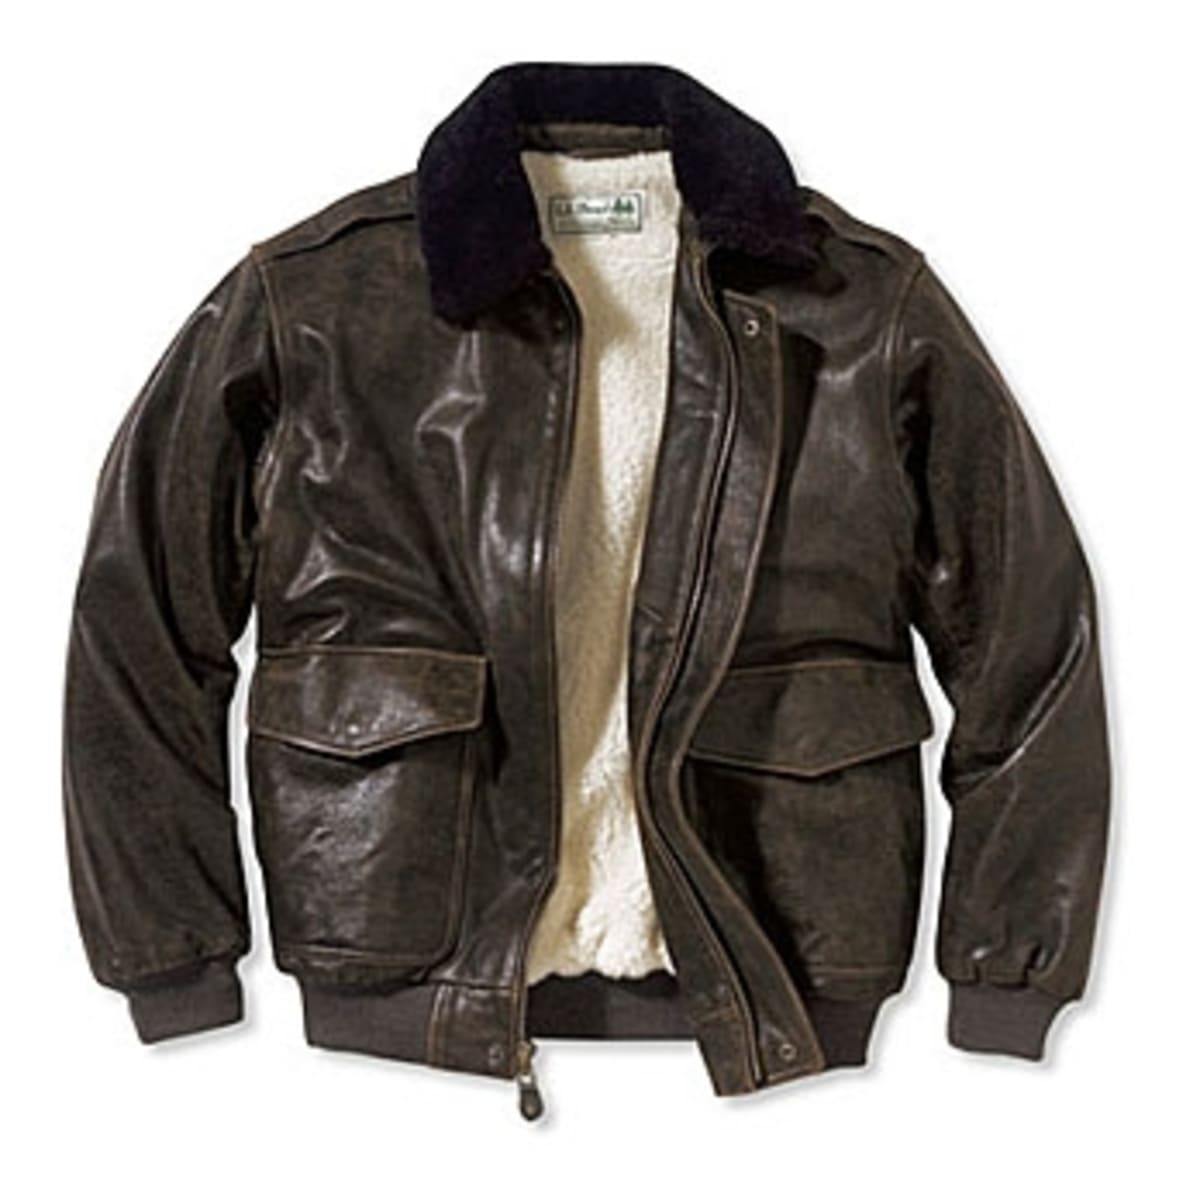 LL Bean Flying Tiger WWII Jacket: Best Leather Jackets - Men's Journal